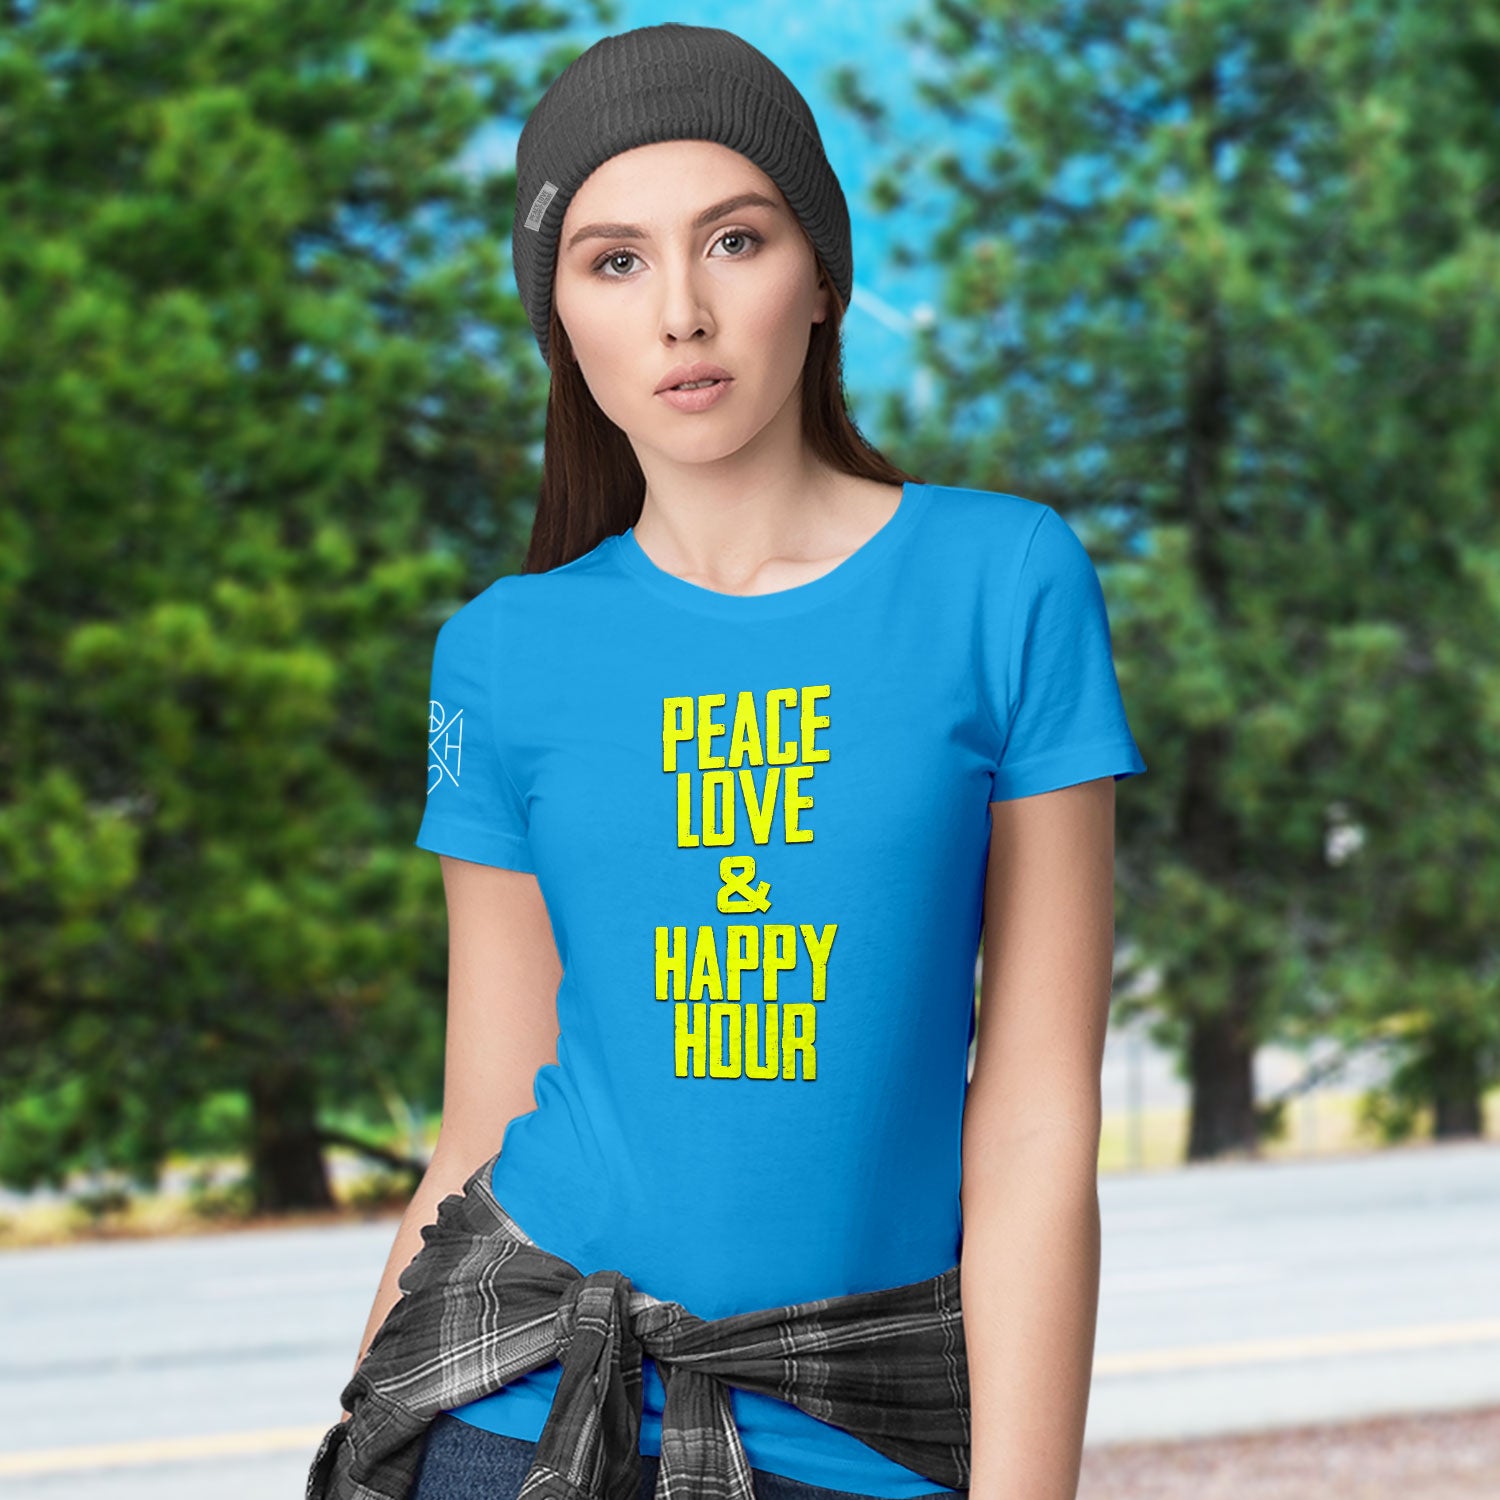 Love and Peace Good Vibes – Happy Hour T-Shirt